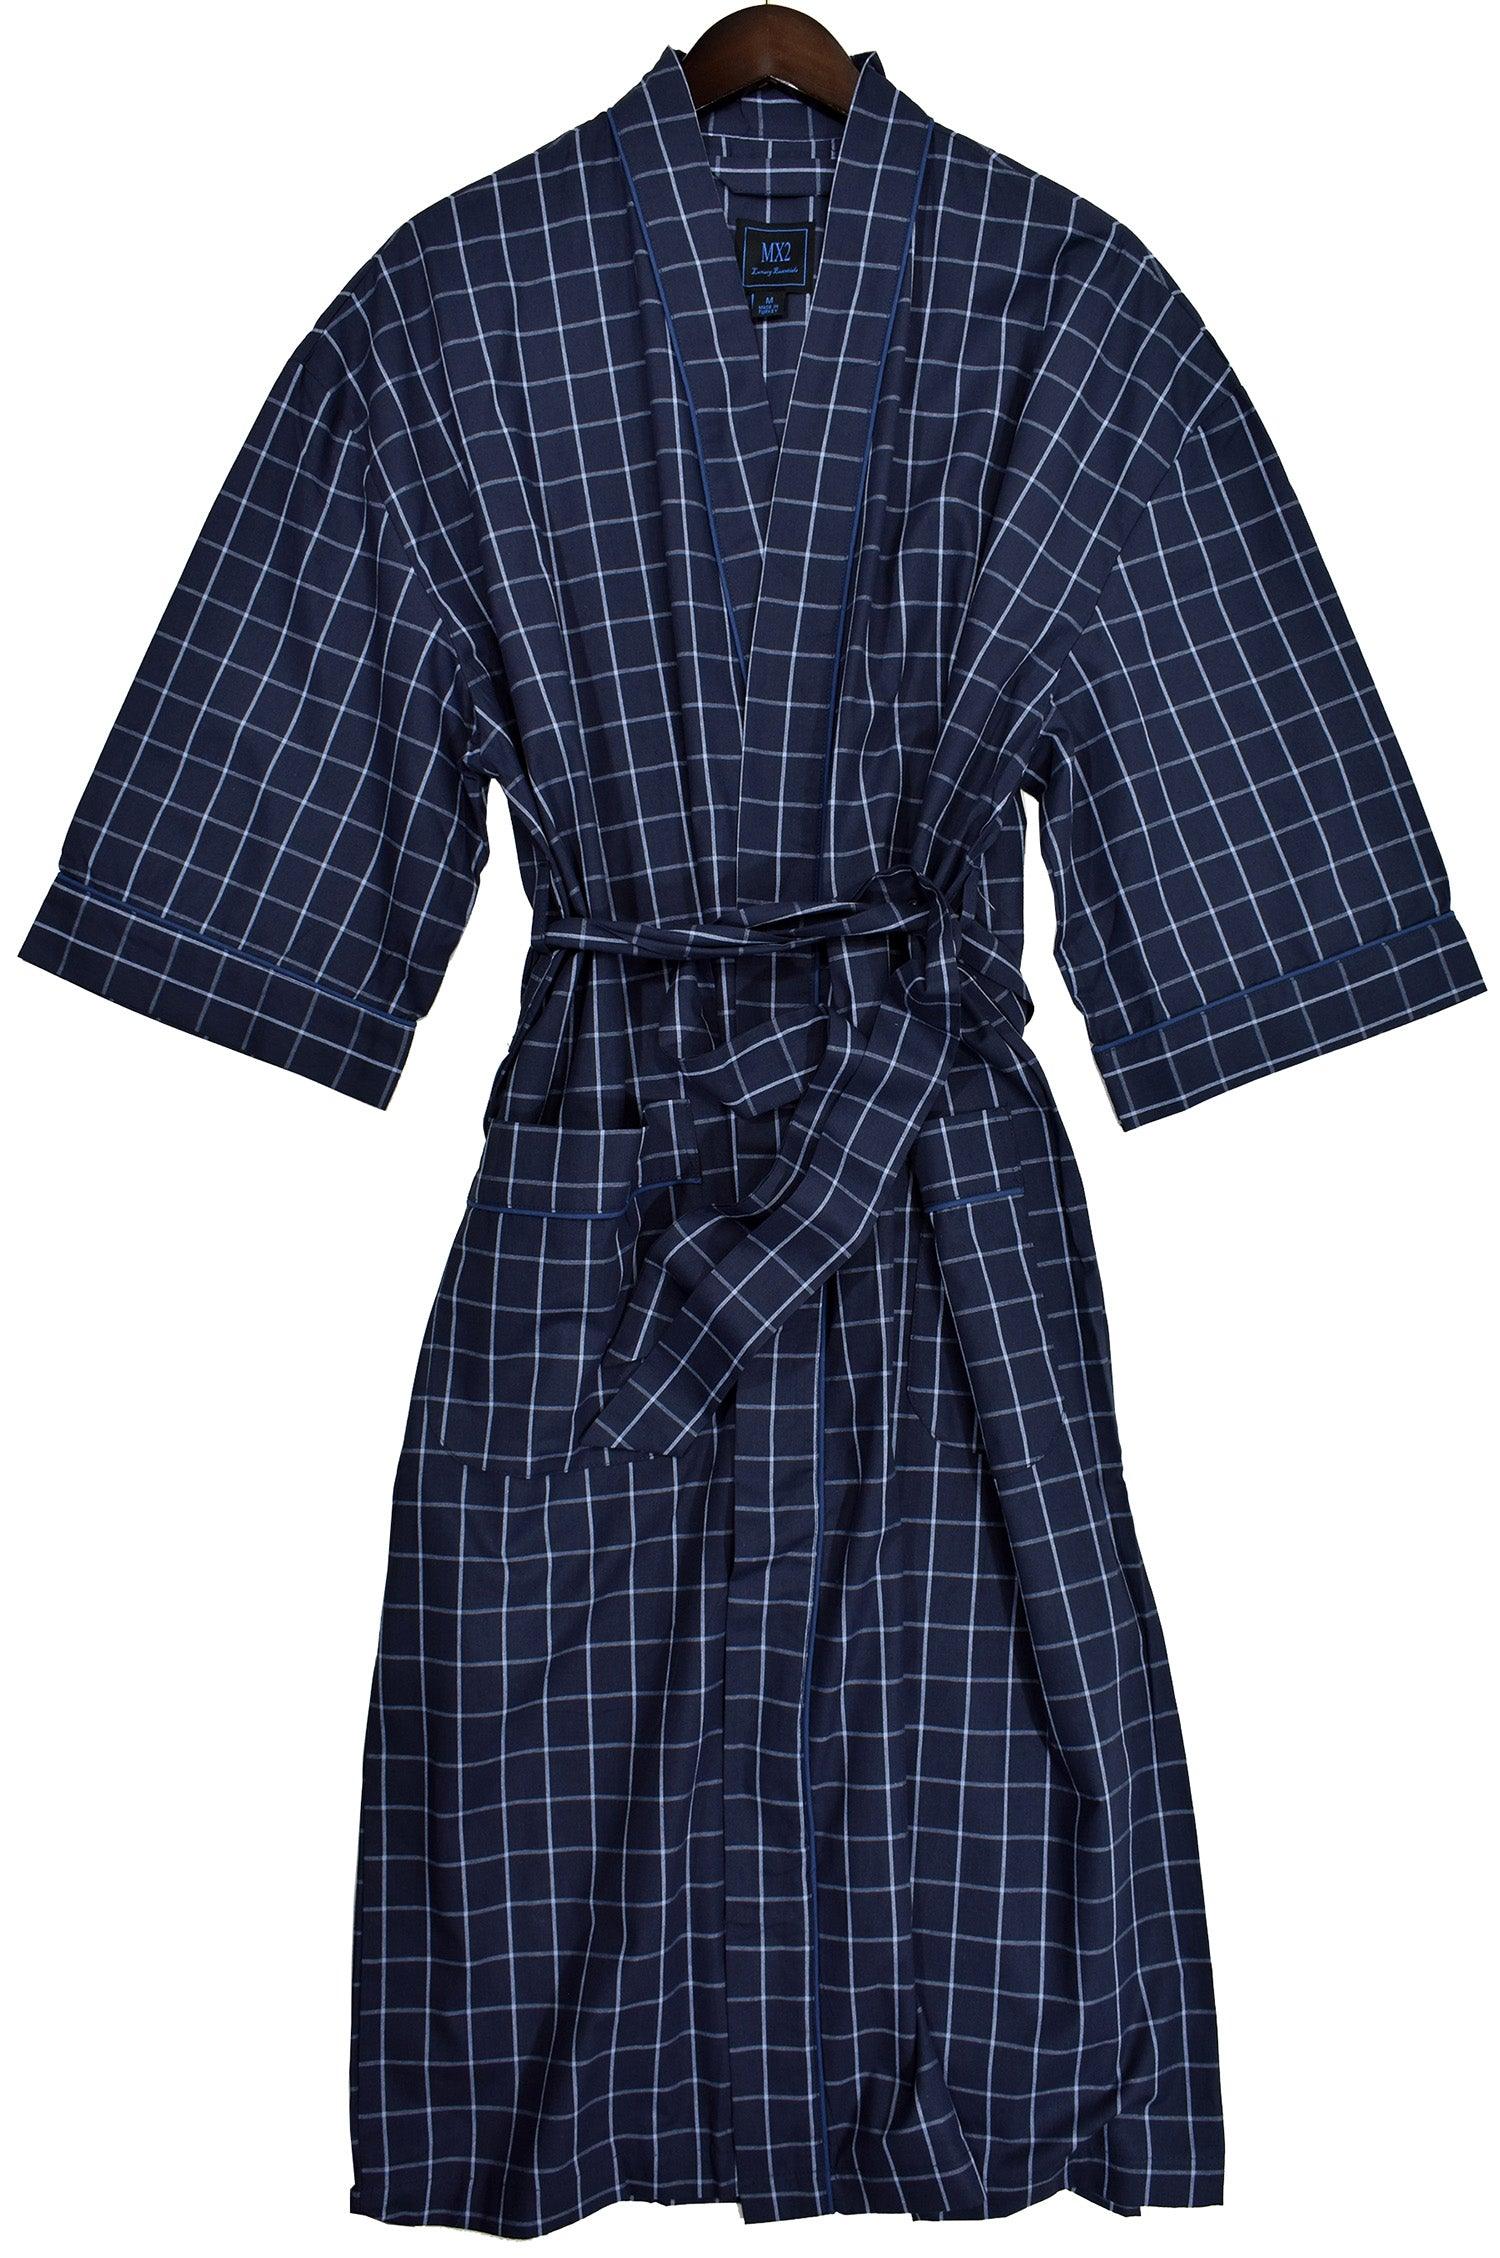 Soft woven cotton fabric. Updated traditional window pane pattern. True navy with soft grey windowpane. Classic front cargo pockets. Classic draw string at waist line. Kimono sizing, one size fits all.  By Marcello Sport